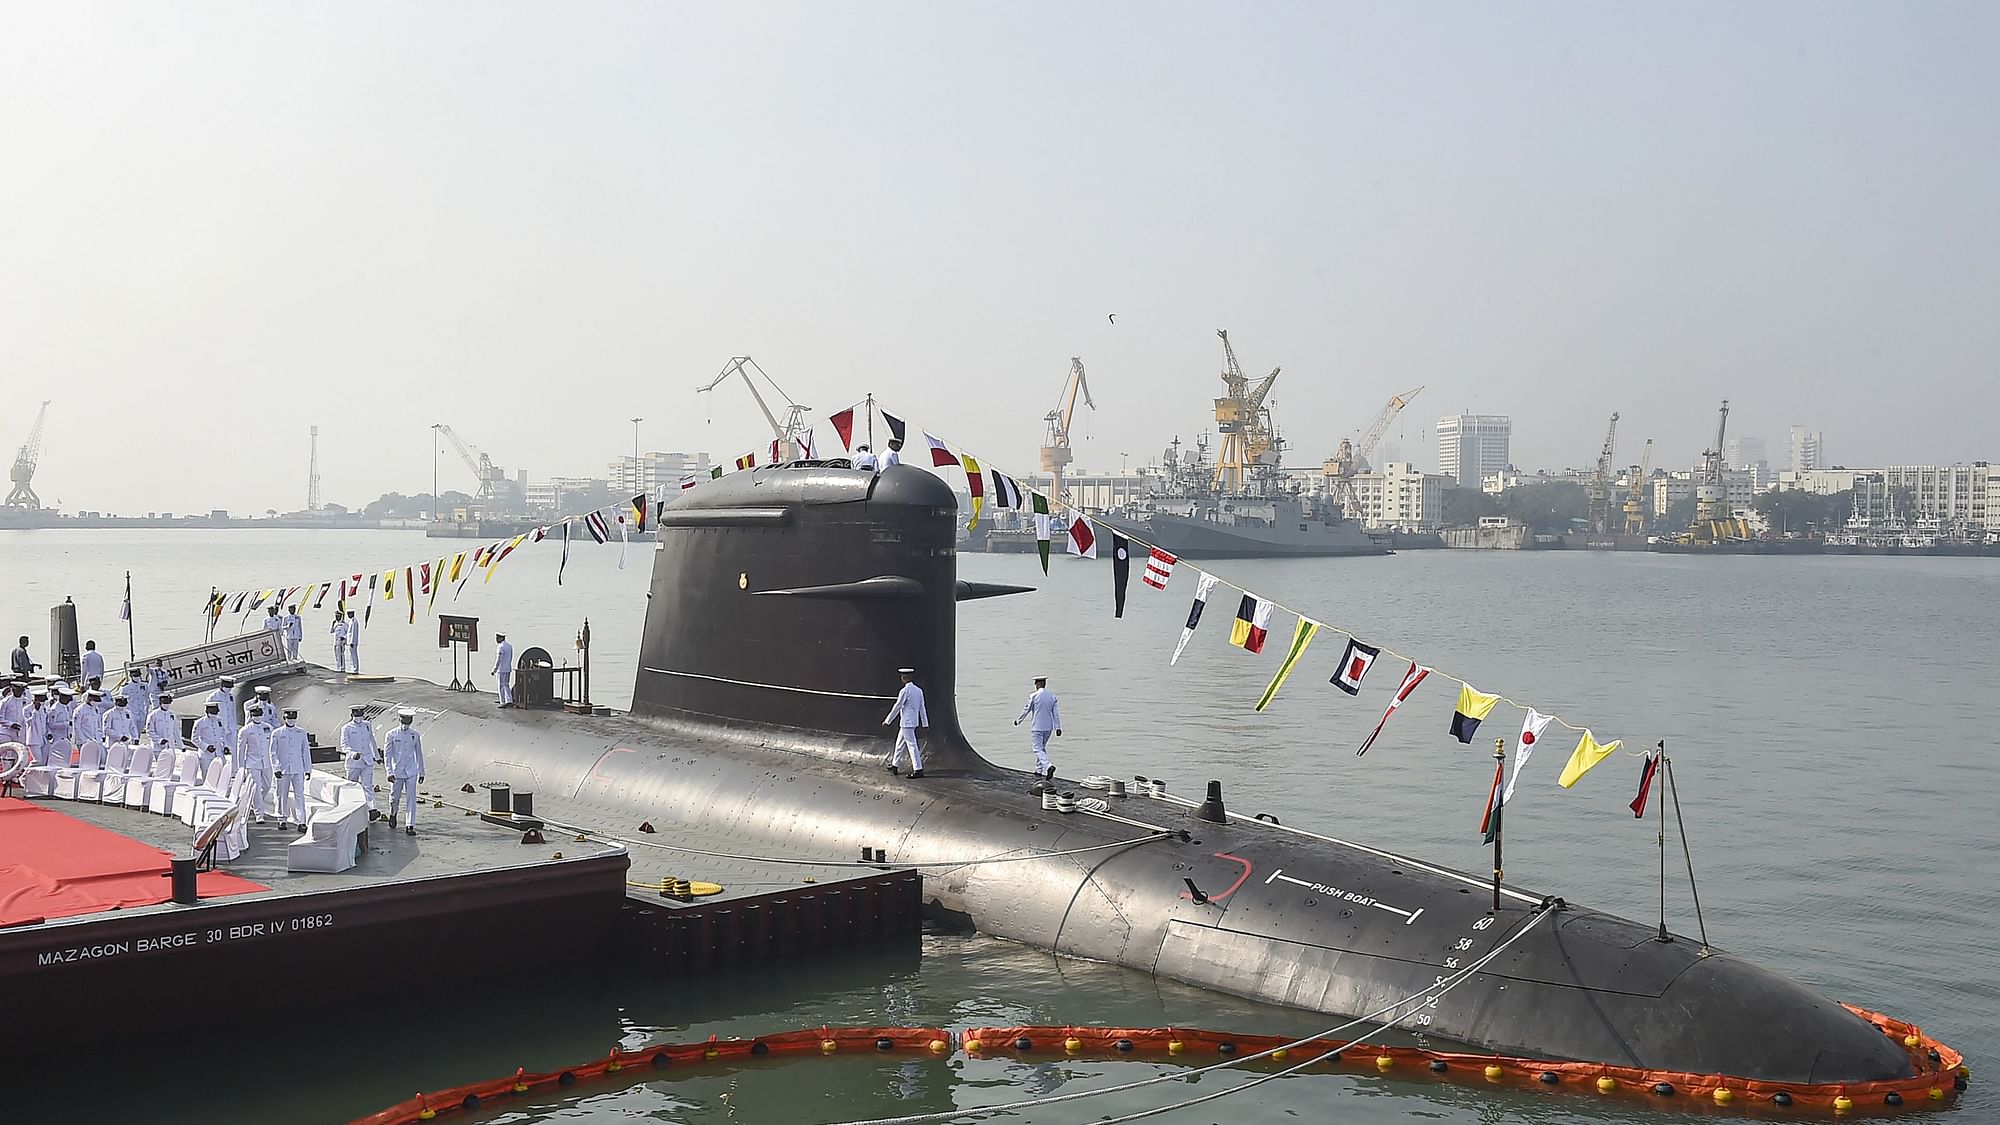 <div class="paragraphs"><p>The Indian Navy on Thursday, 25 November commissioned a brand new submarine, built by the government owned Mazagon Dock Shipbuilders Ltd or MDL at the Naval Dockyard in Mumbai in the presence of Admiral Karambir Singh, Chief of the Naval Staff.</p></div>